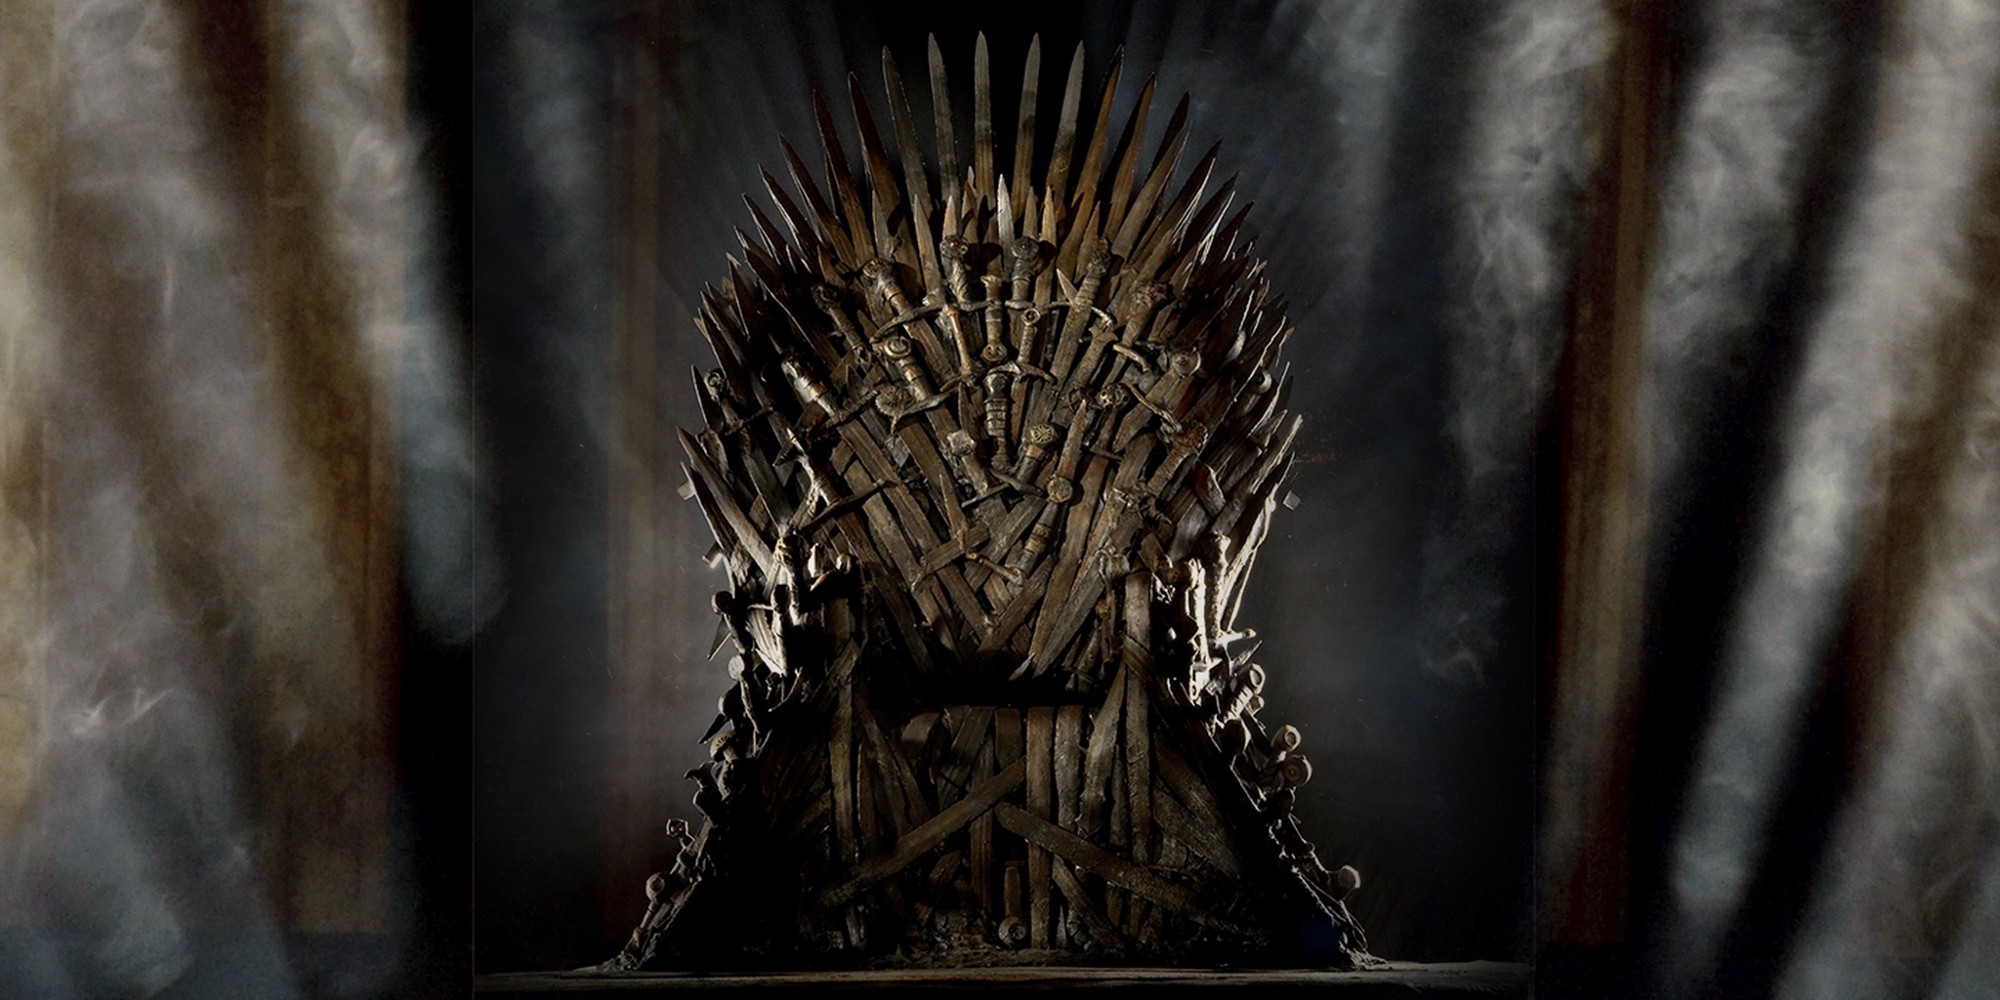 ⚔️ Everyone Has a “Game of Thrones” Kingdom They Belong in — Here’s Yours dc990bc3 5c87 46a7 858e 71e6a51cdf5a iron throne1